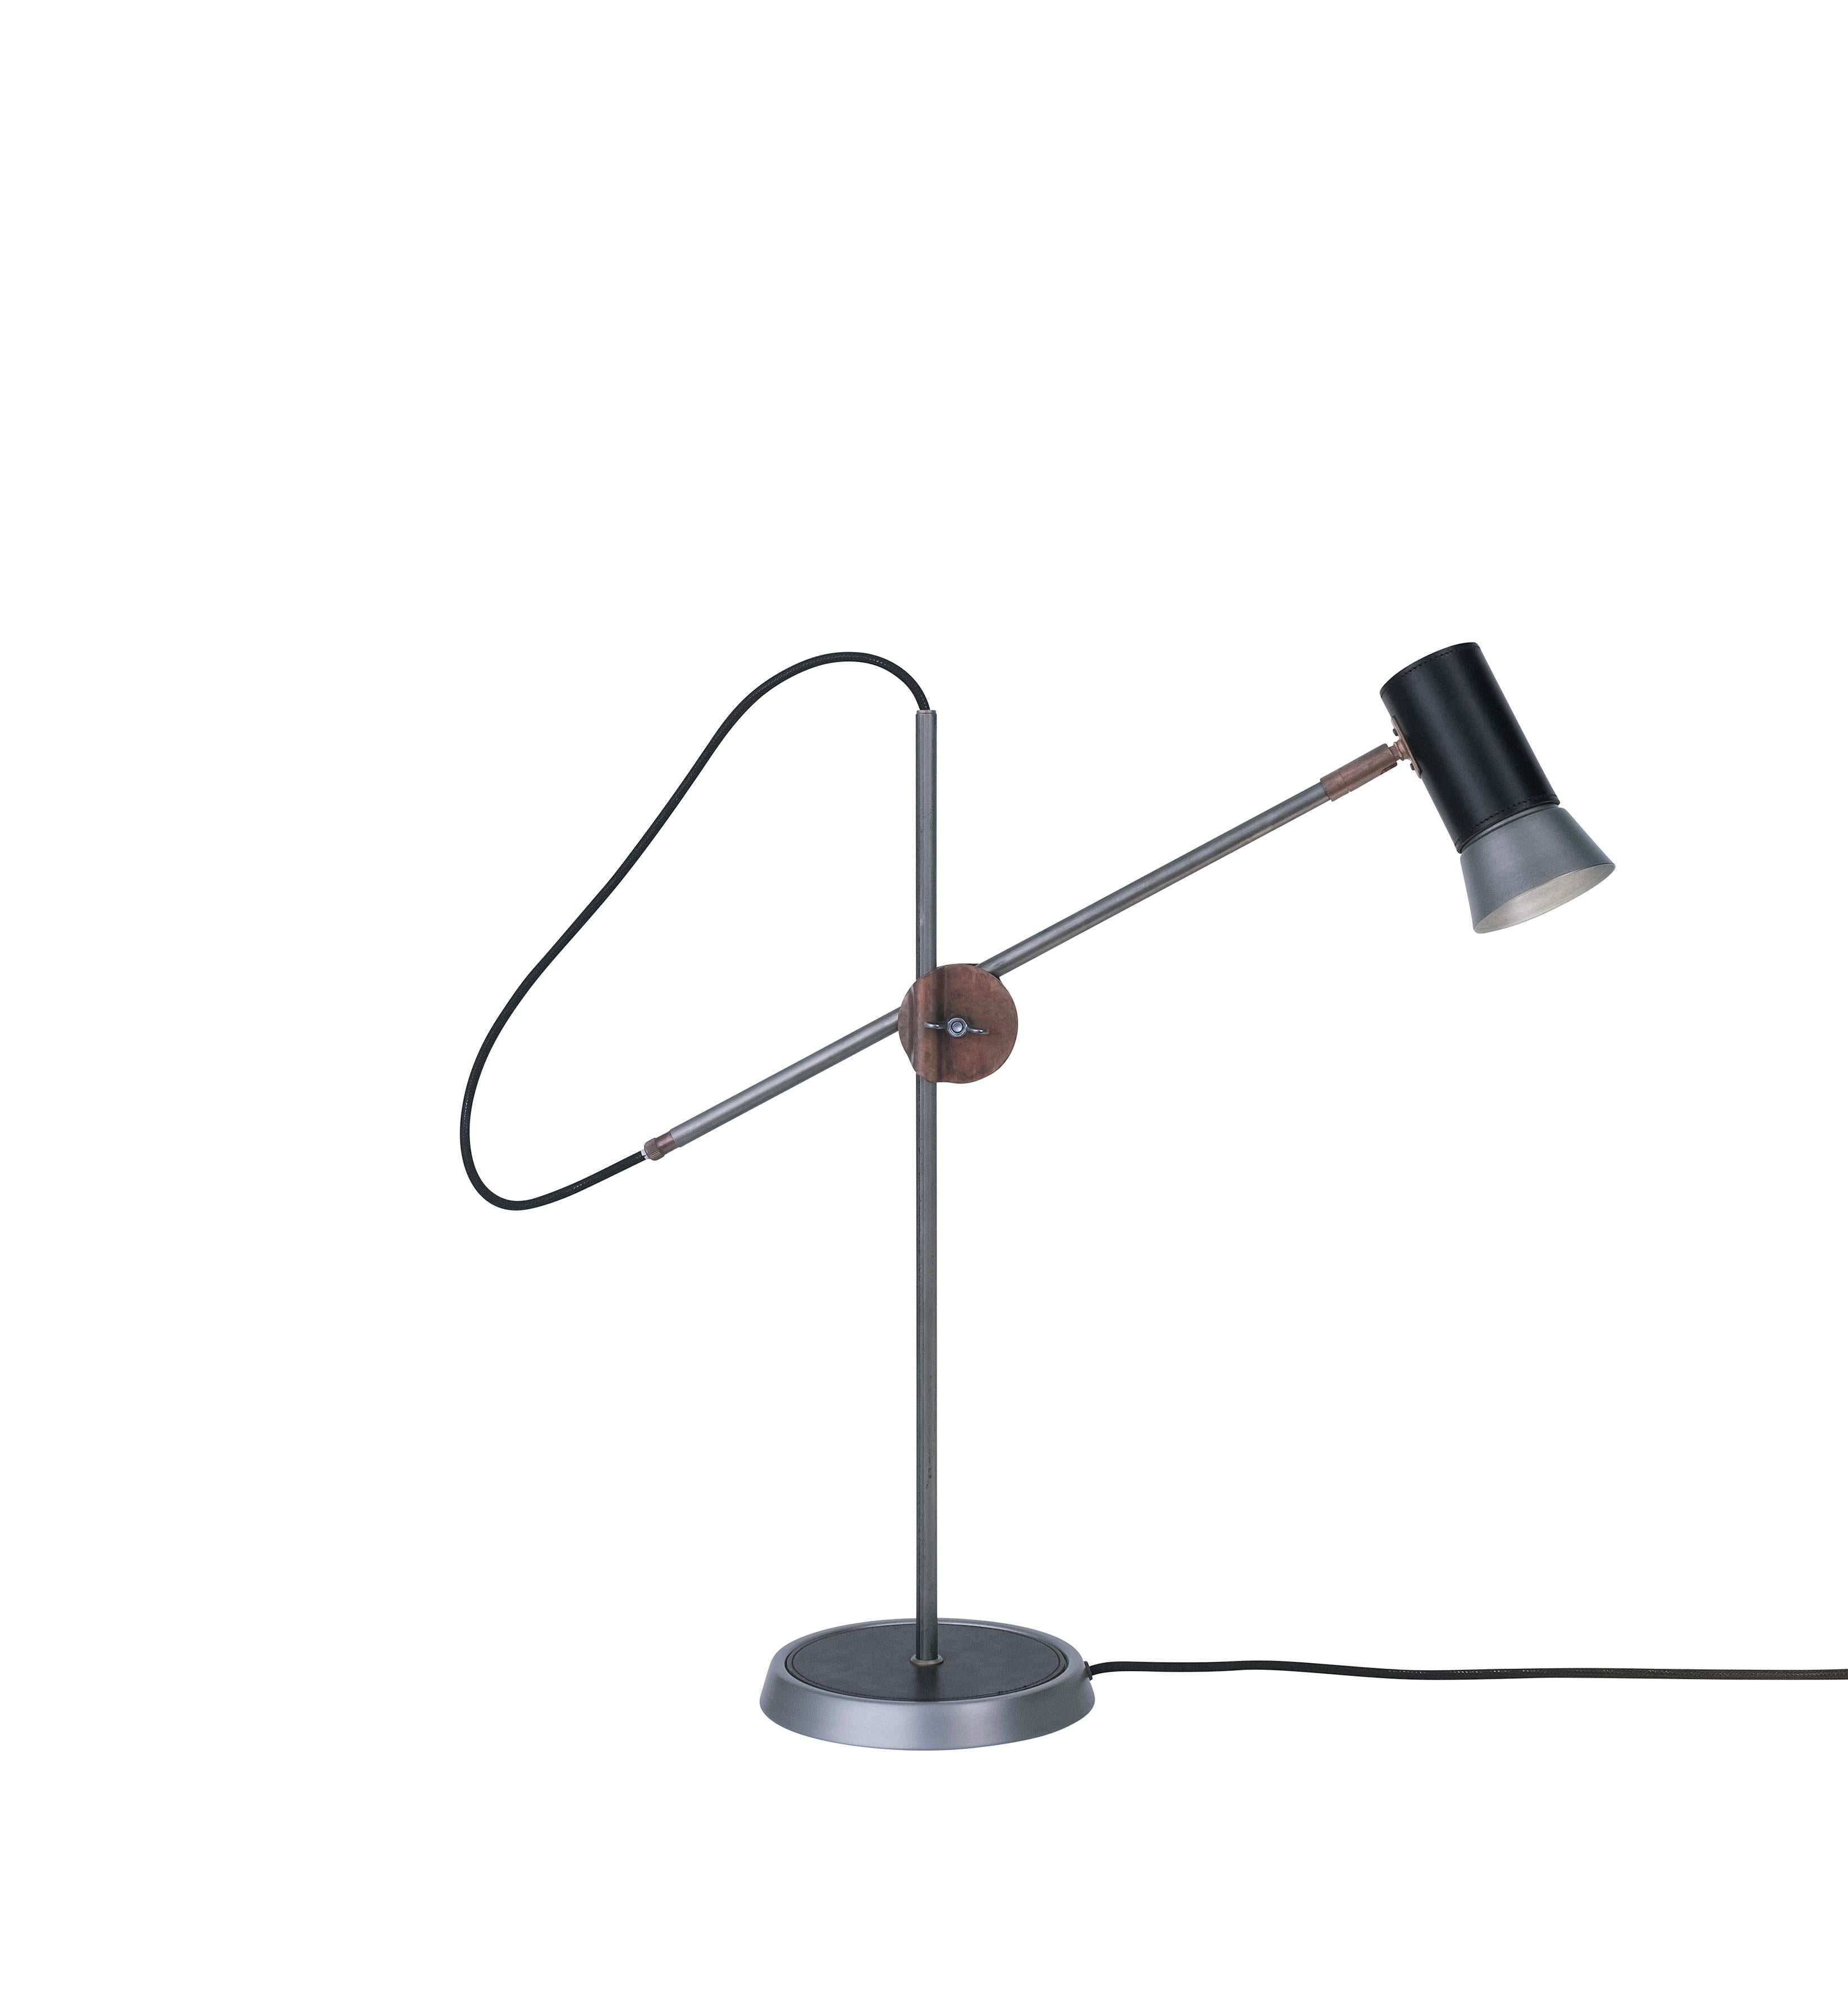 Table lamp model Kusk designed by Sabina Grubbeson and manufactured by Konsthantverk.

The production of lamps, wall lights and floor lamps are manufactured using craftsman’s techniques with the same materials and techniques as the first